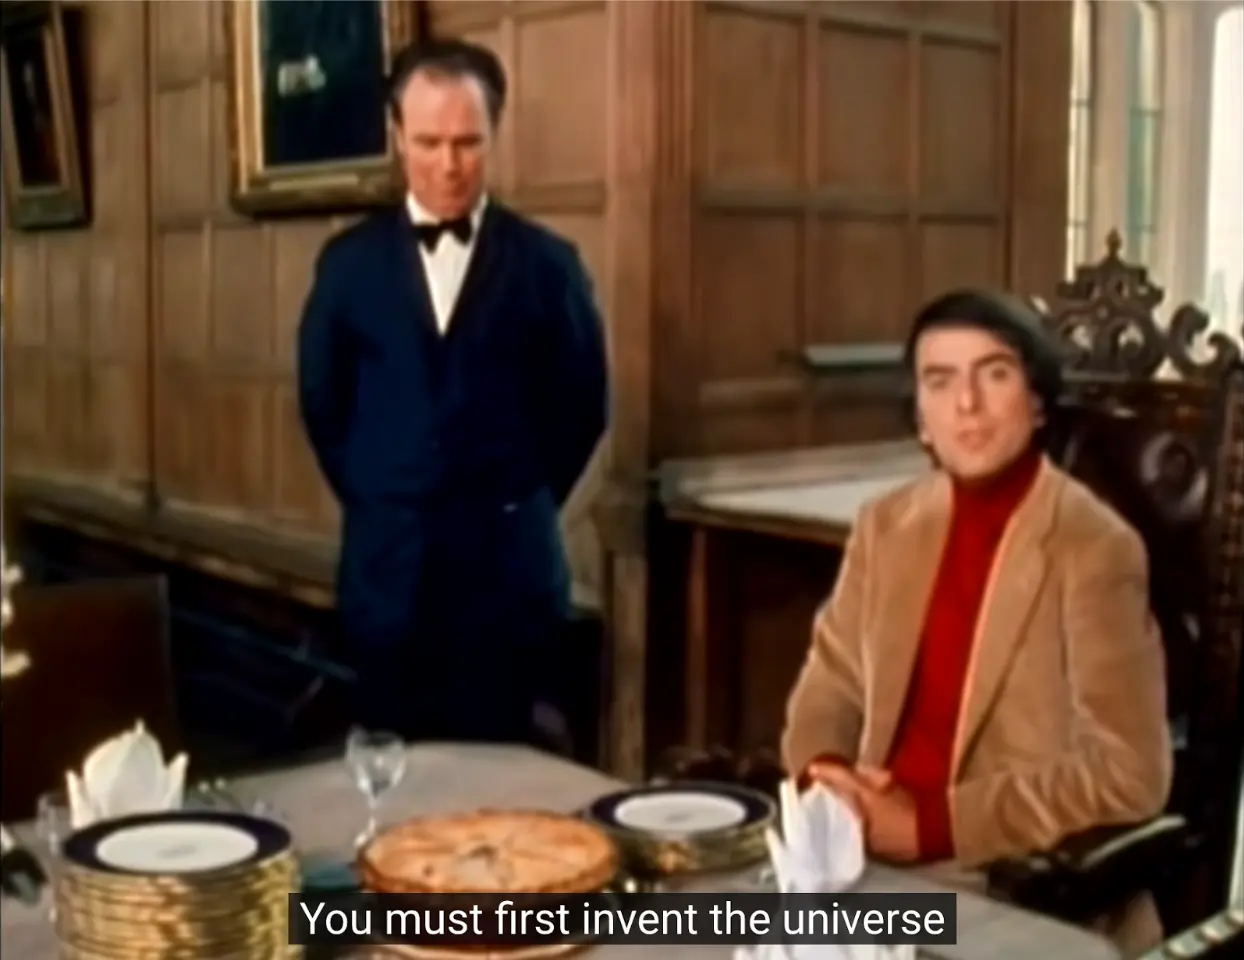 You must first invent the universe